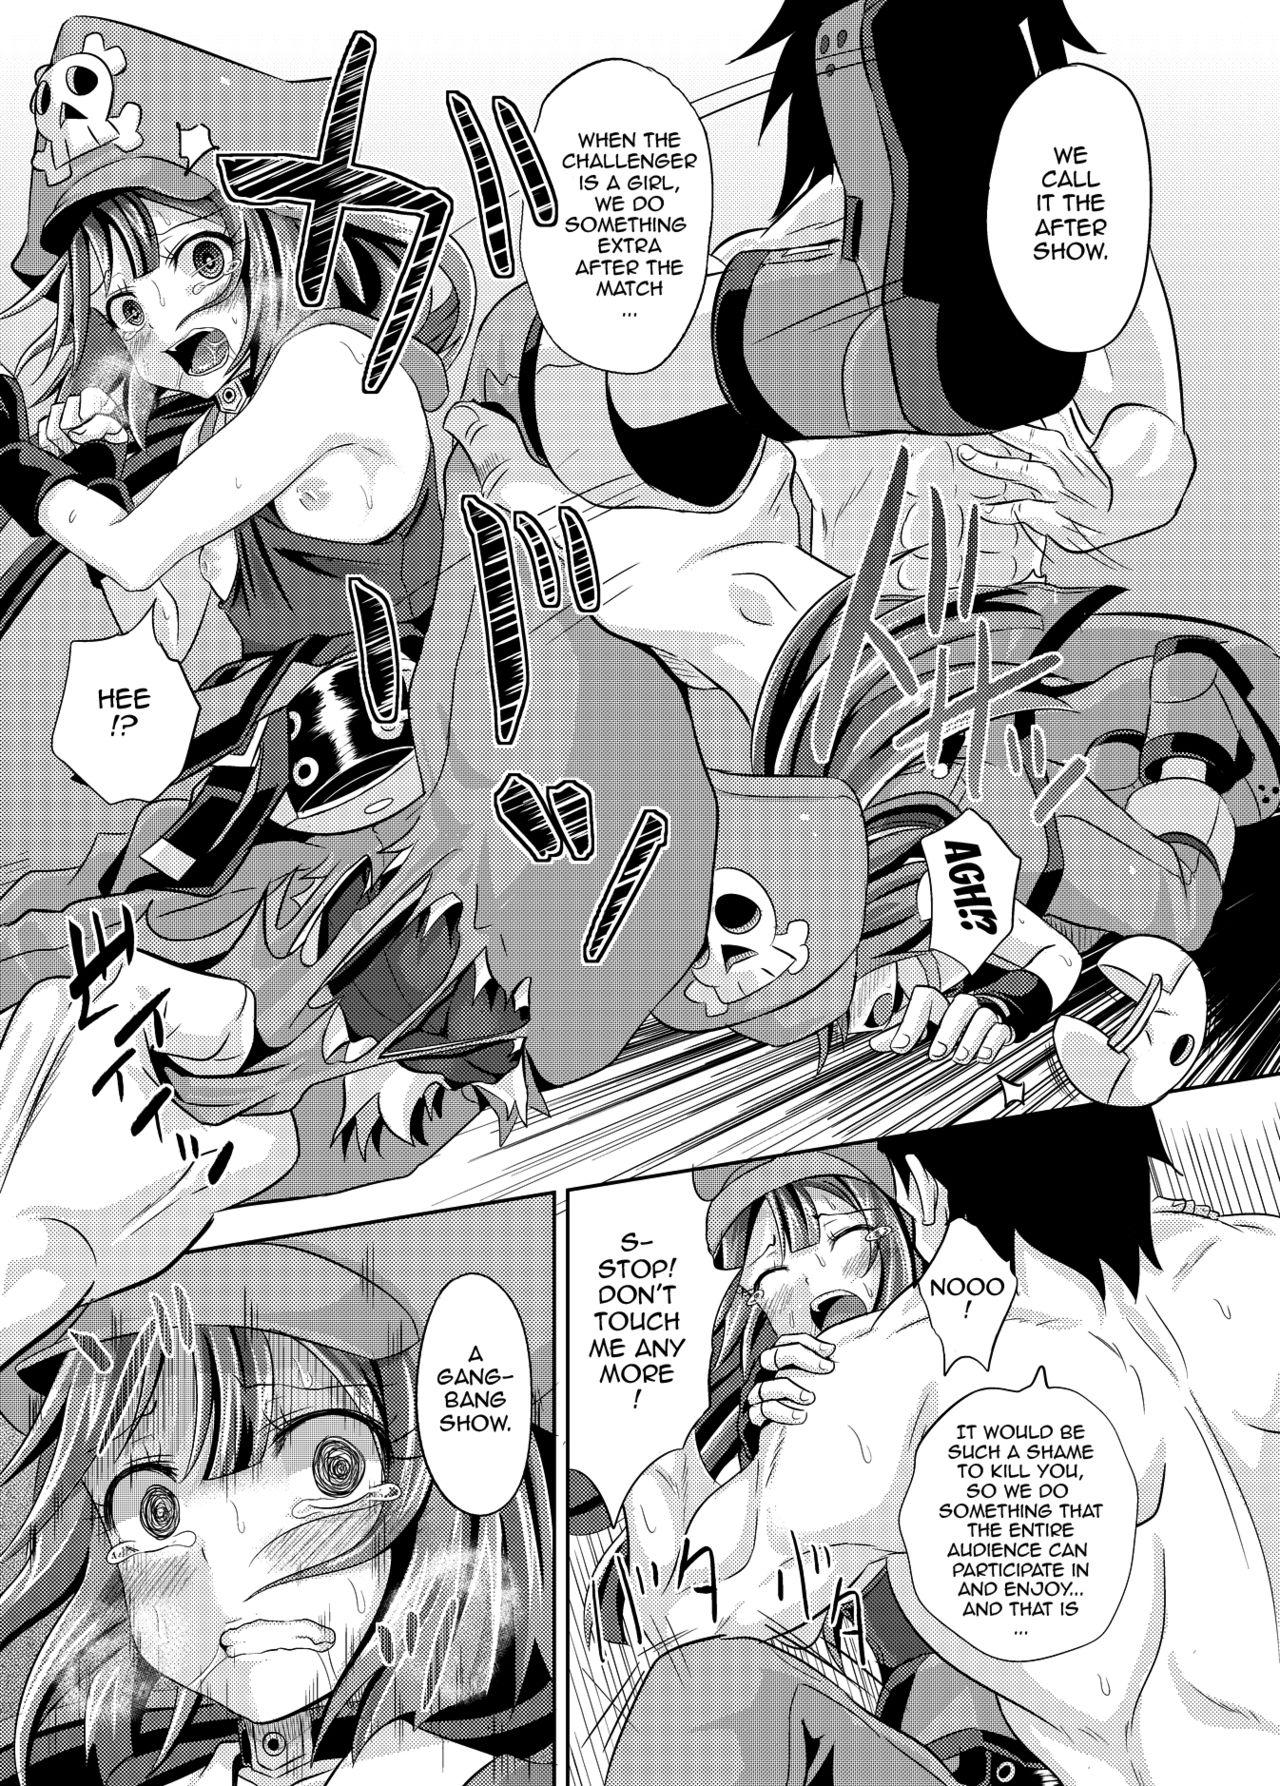 Aunty May-chan Battle Arena - Guilty gear Sloppy Blowjob - Page 10